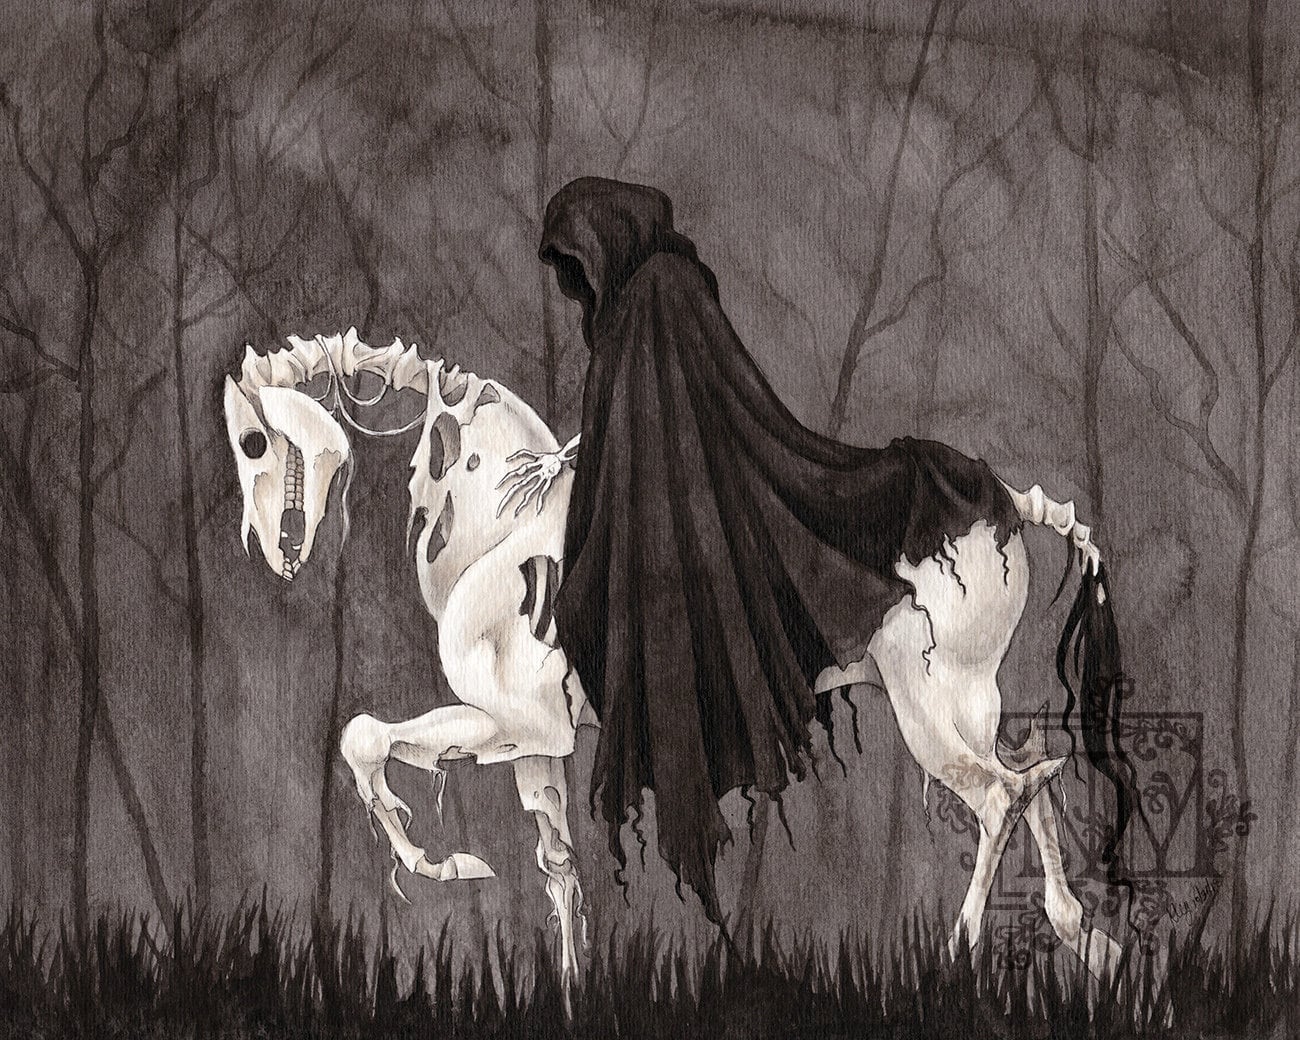 Grim Reaper on a Pale Horse by Bhiggins1218 on deviantART  Pale horse  Grim reaper Grim reaper art